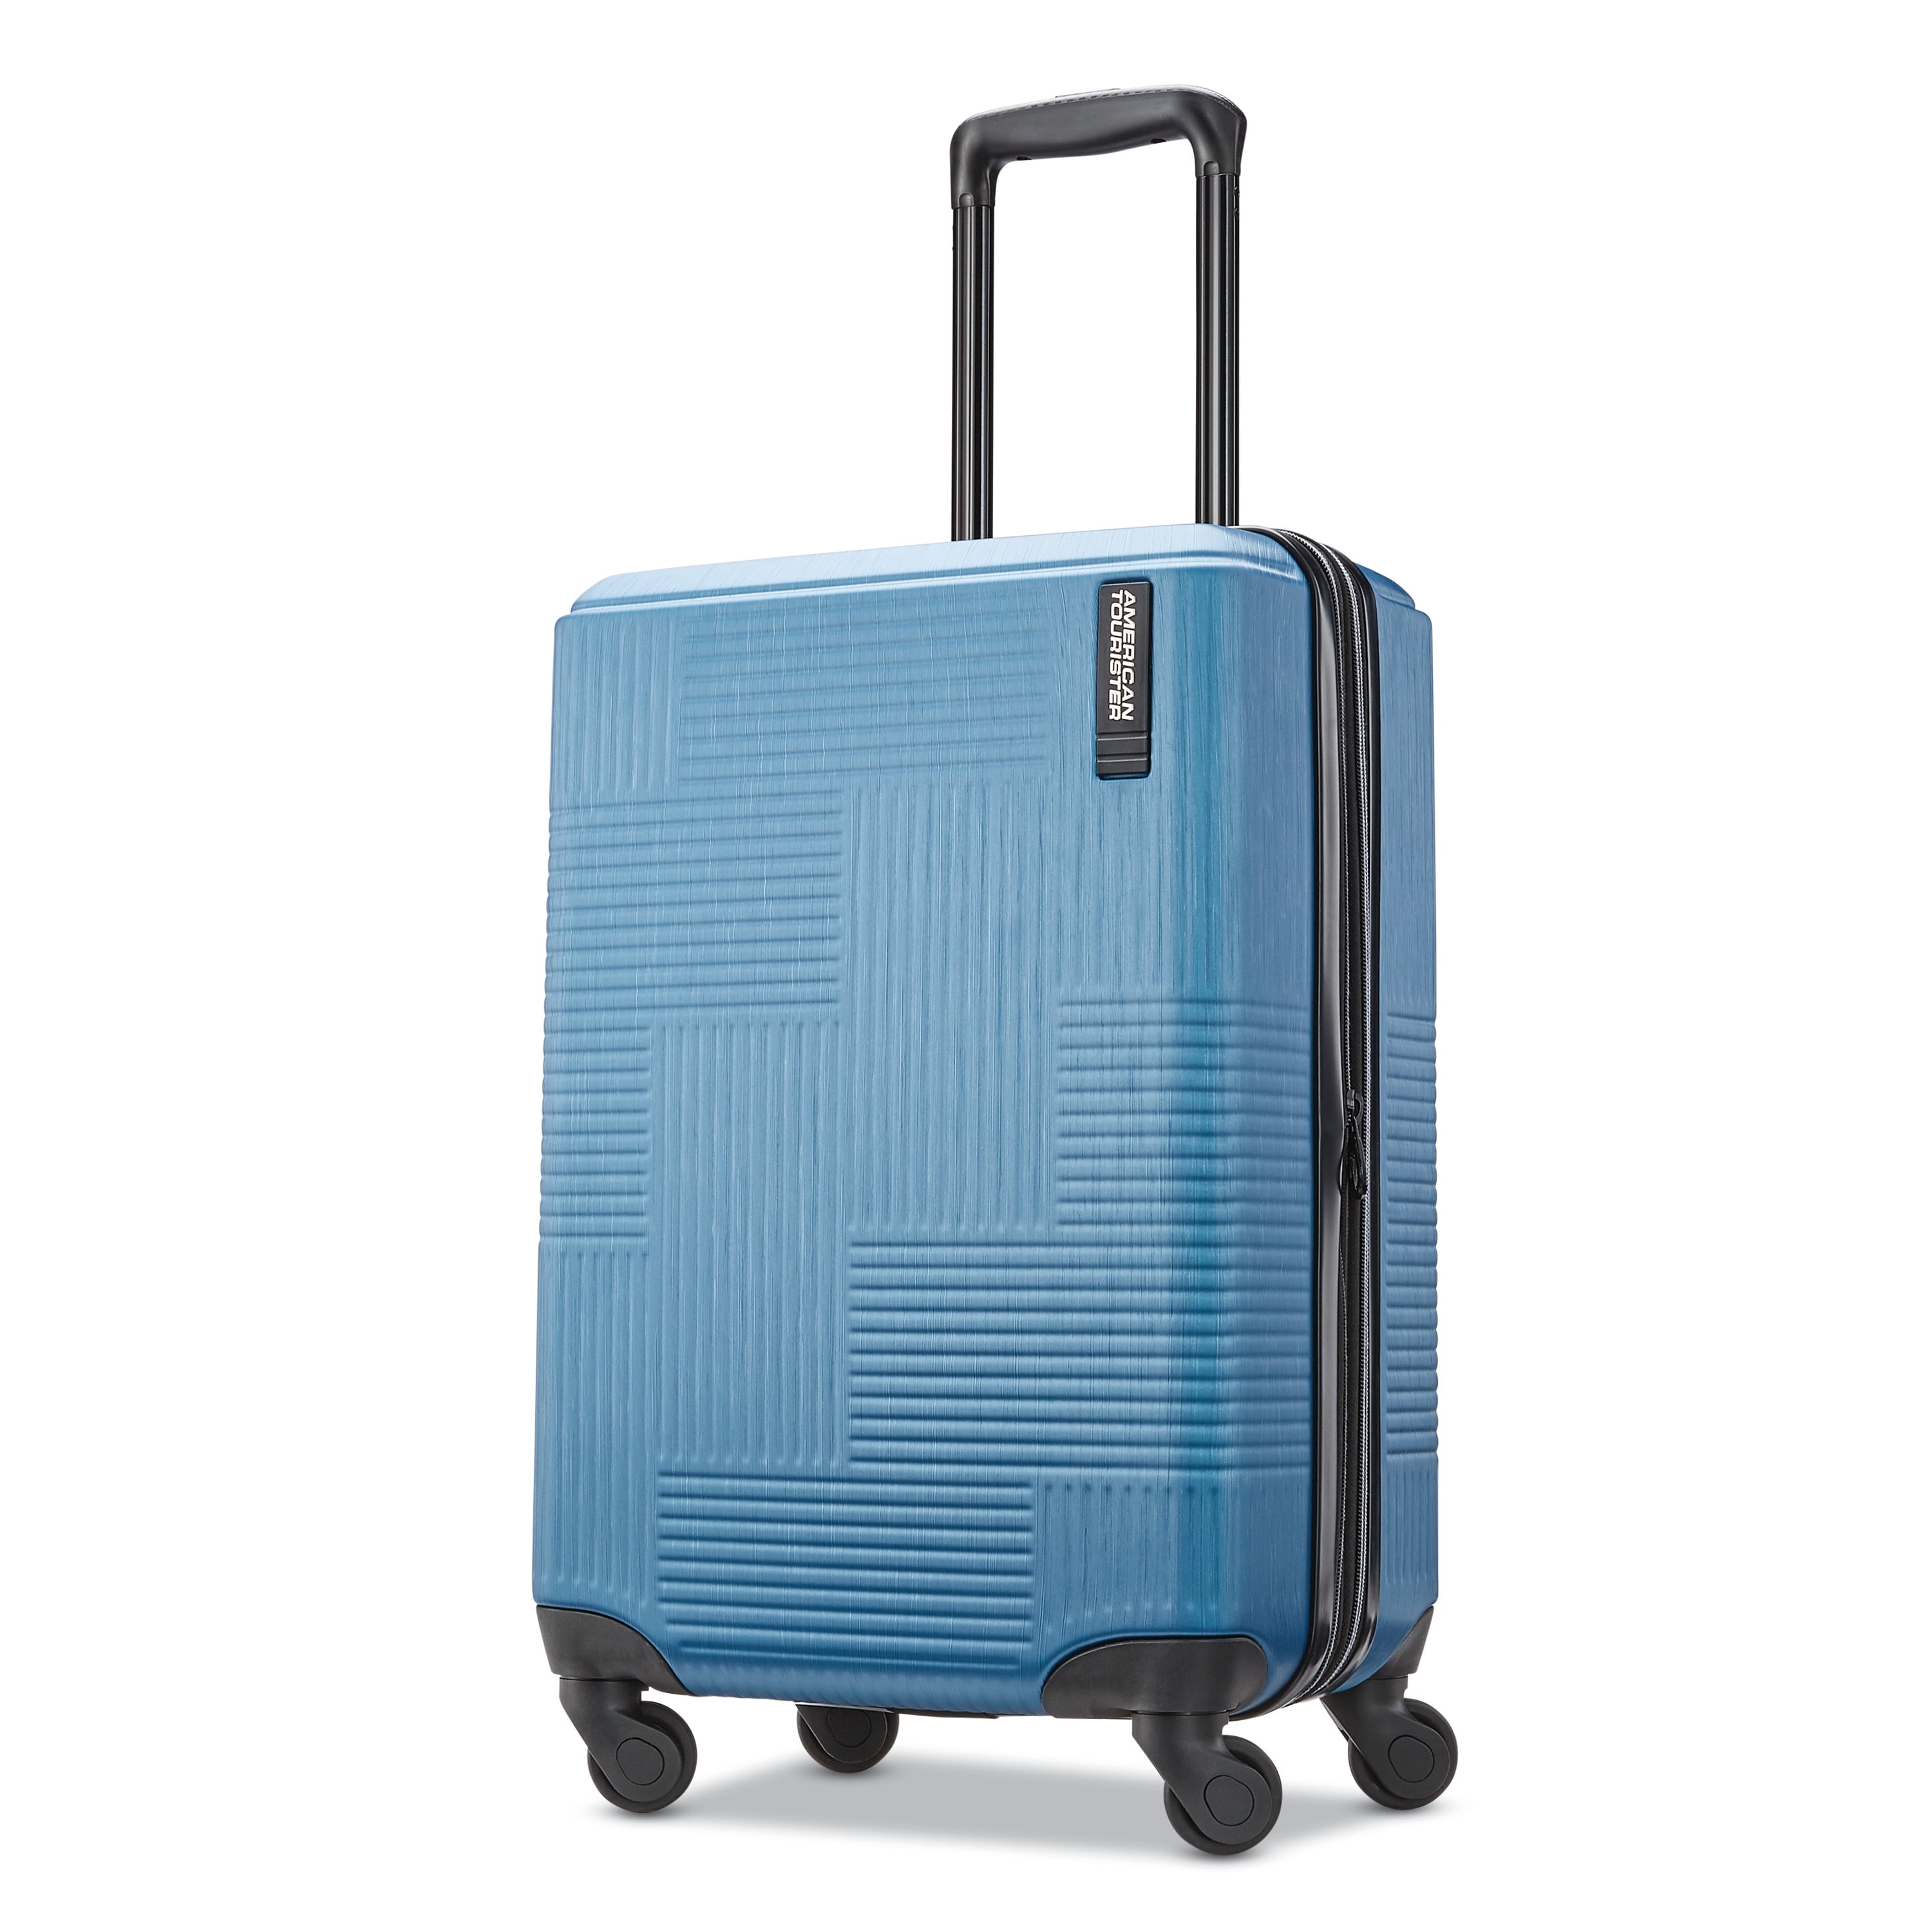 American Tourister Stratum XLT Expandable Hardside Luggage with Spinner Wheels